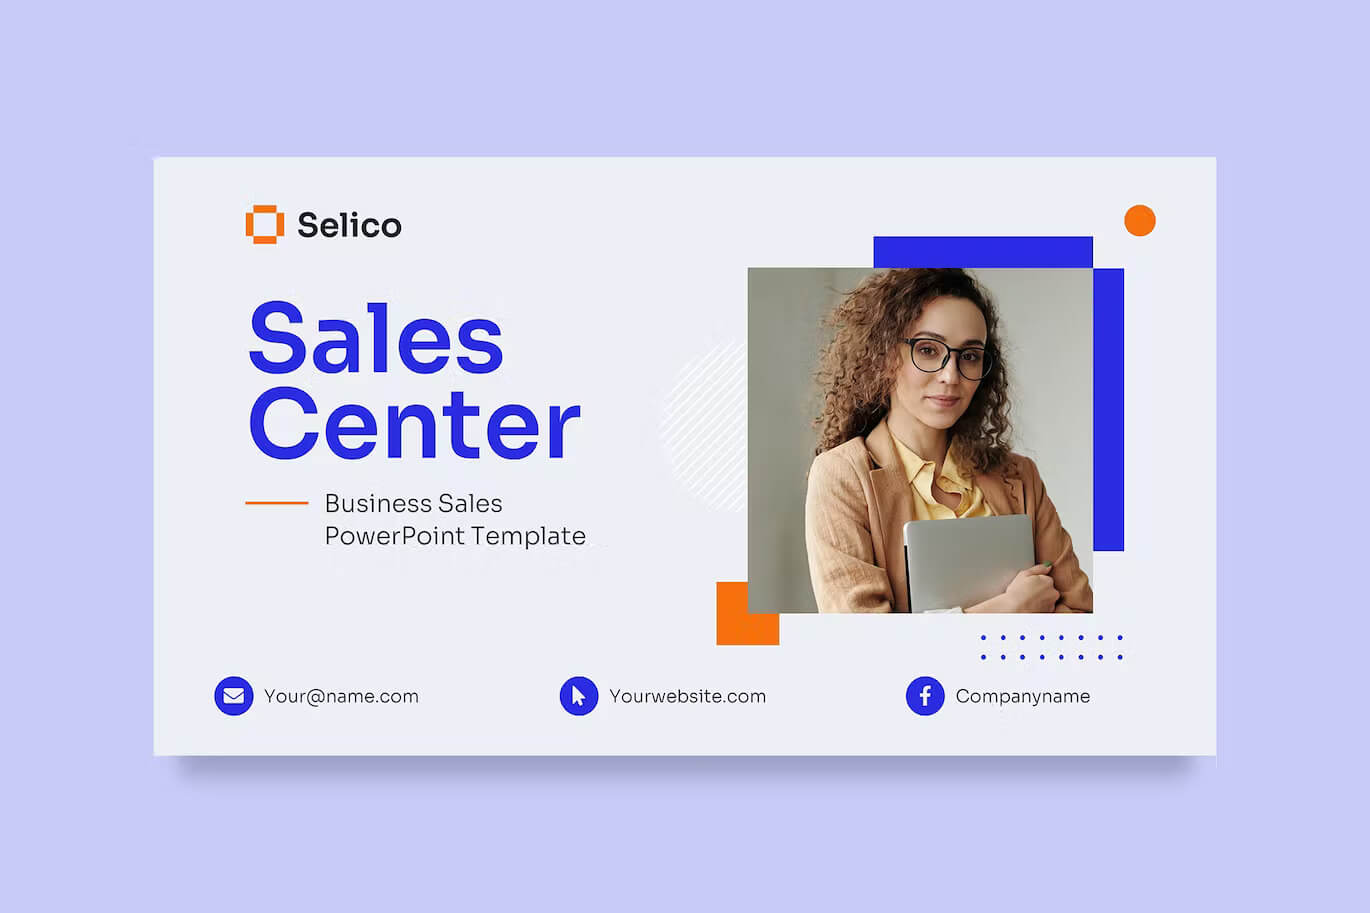 Contacts of Business Sales PowerPoint Presentation Template.